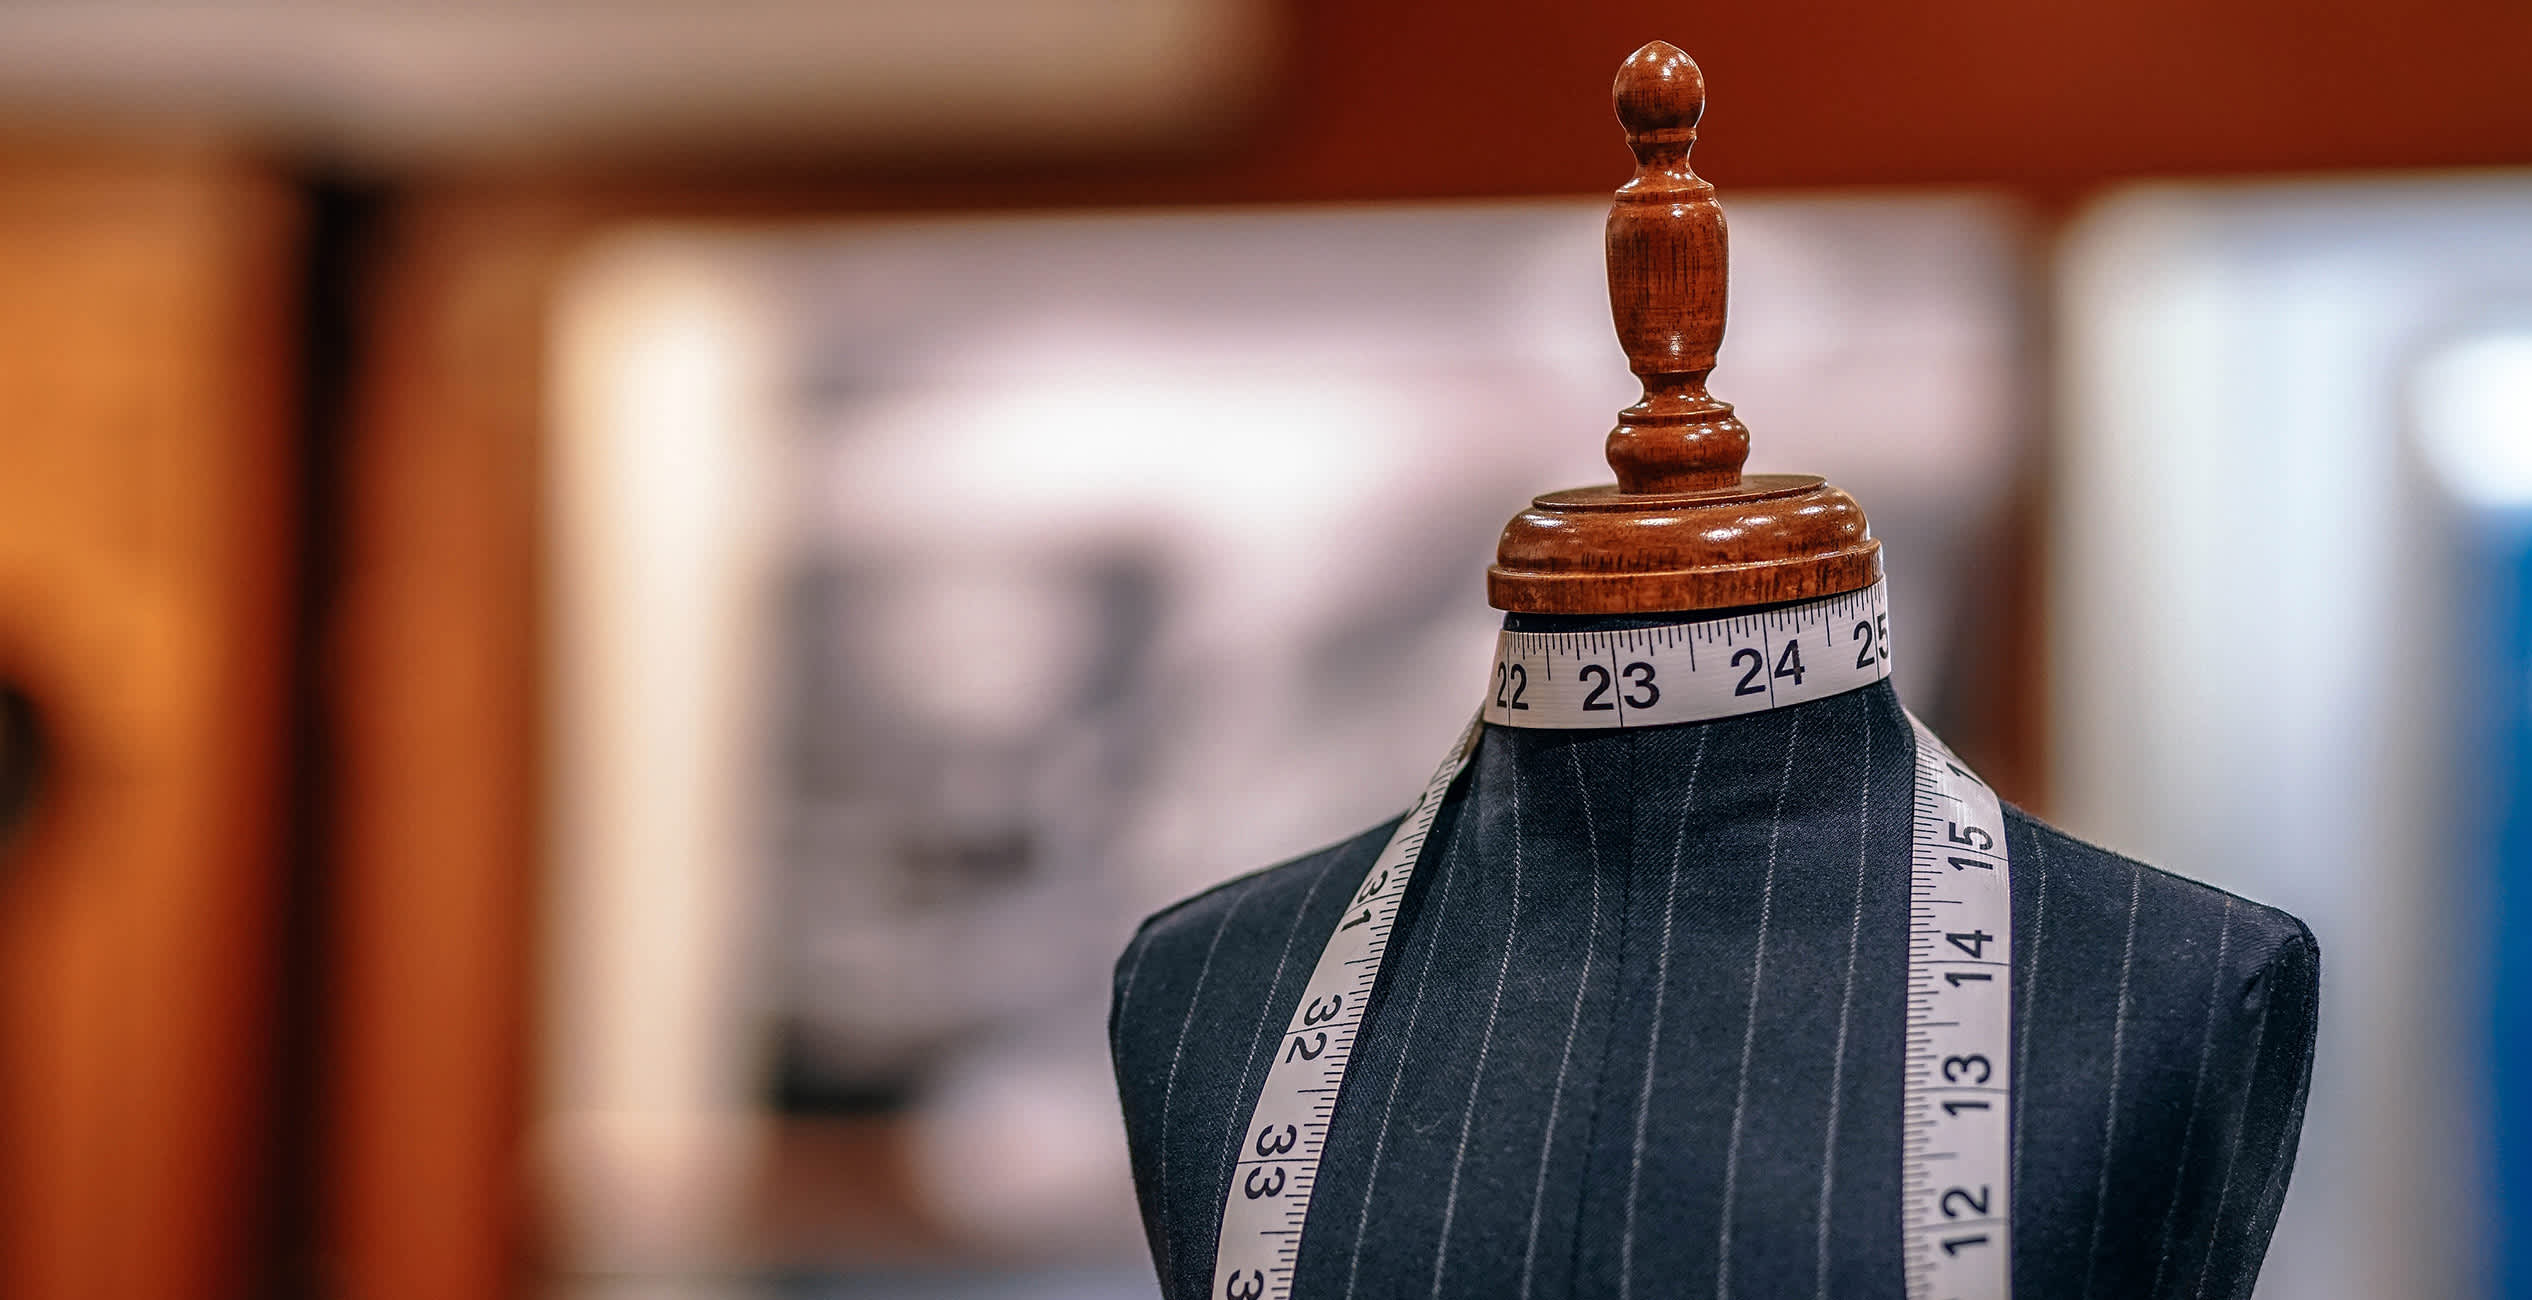 A tailor's form with a tape measure in a store.